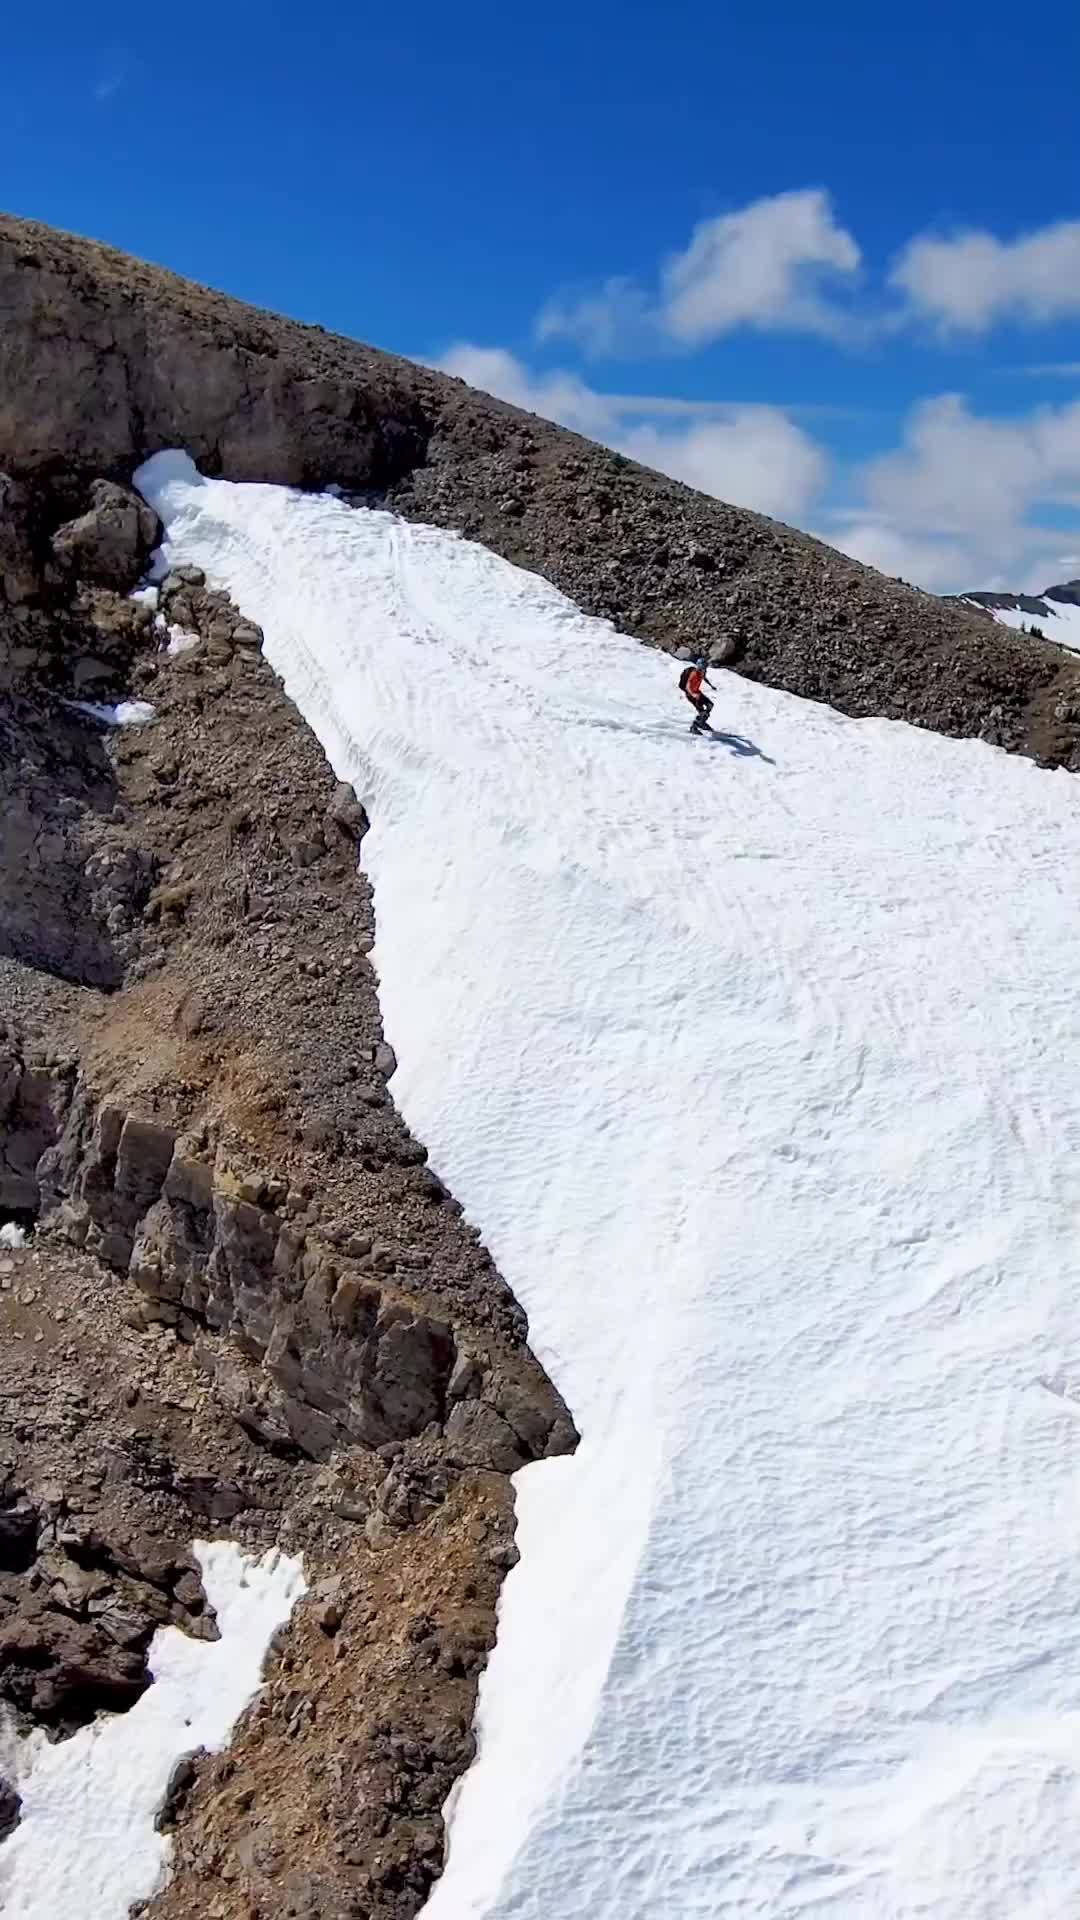 Thrilling Backcountry Skiing in Jackson Hole, Wyoming